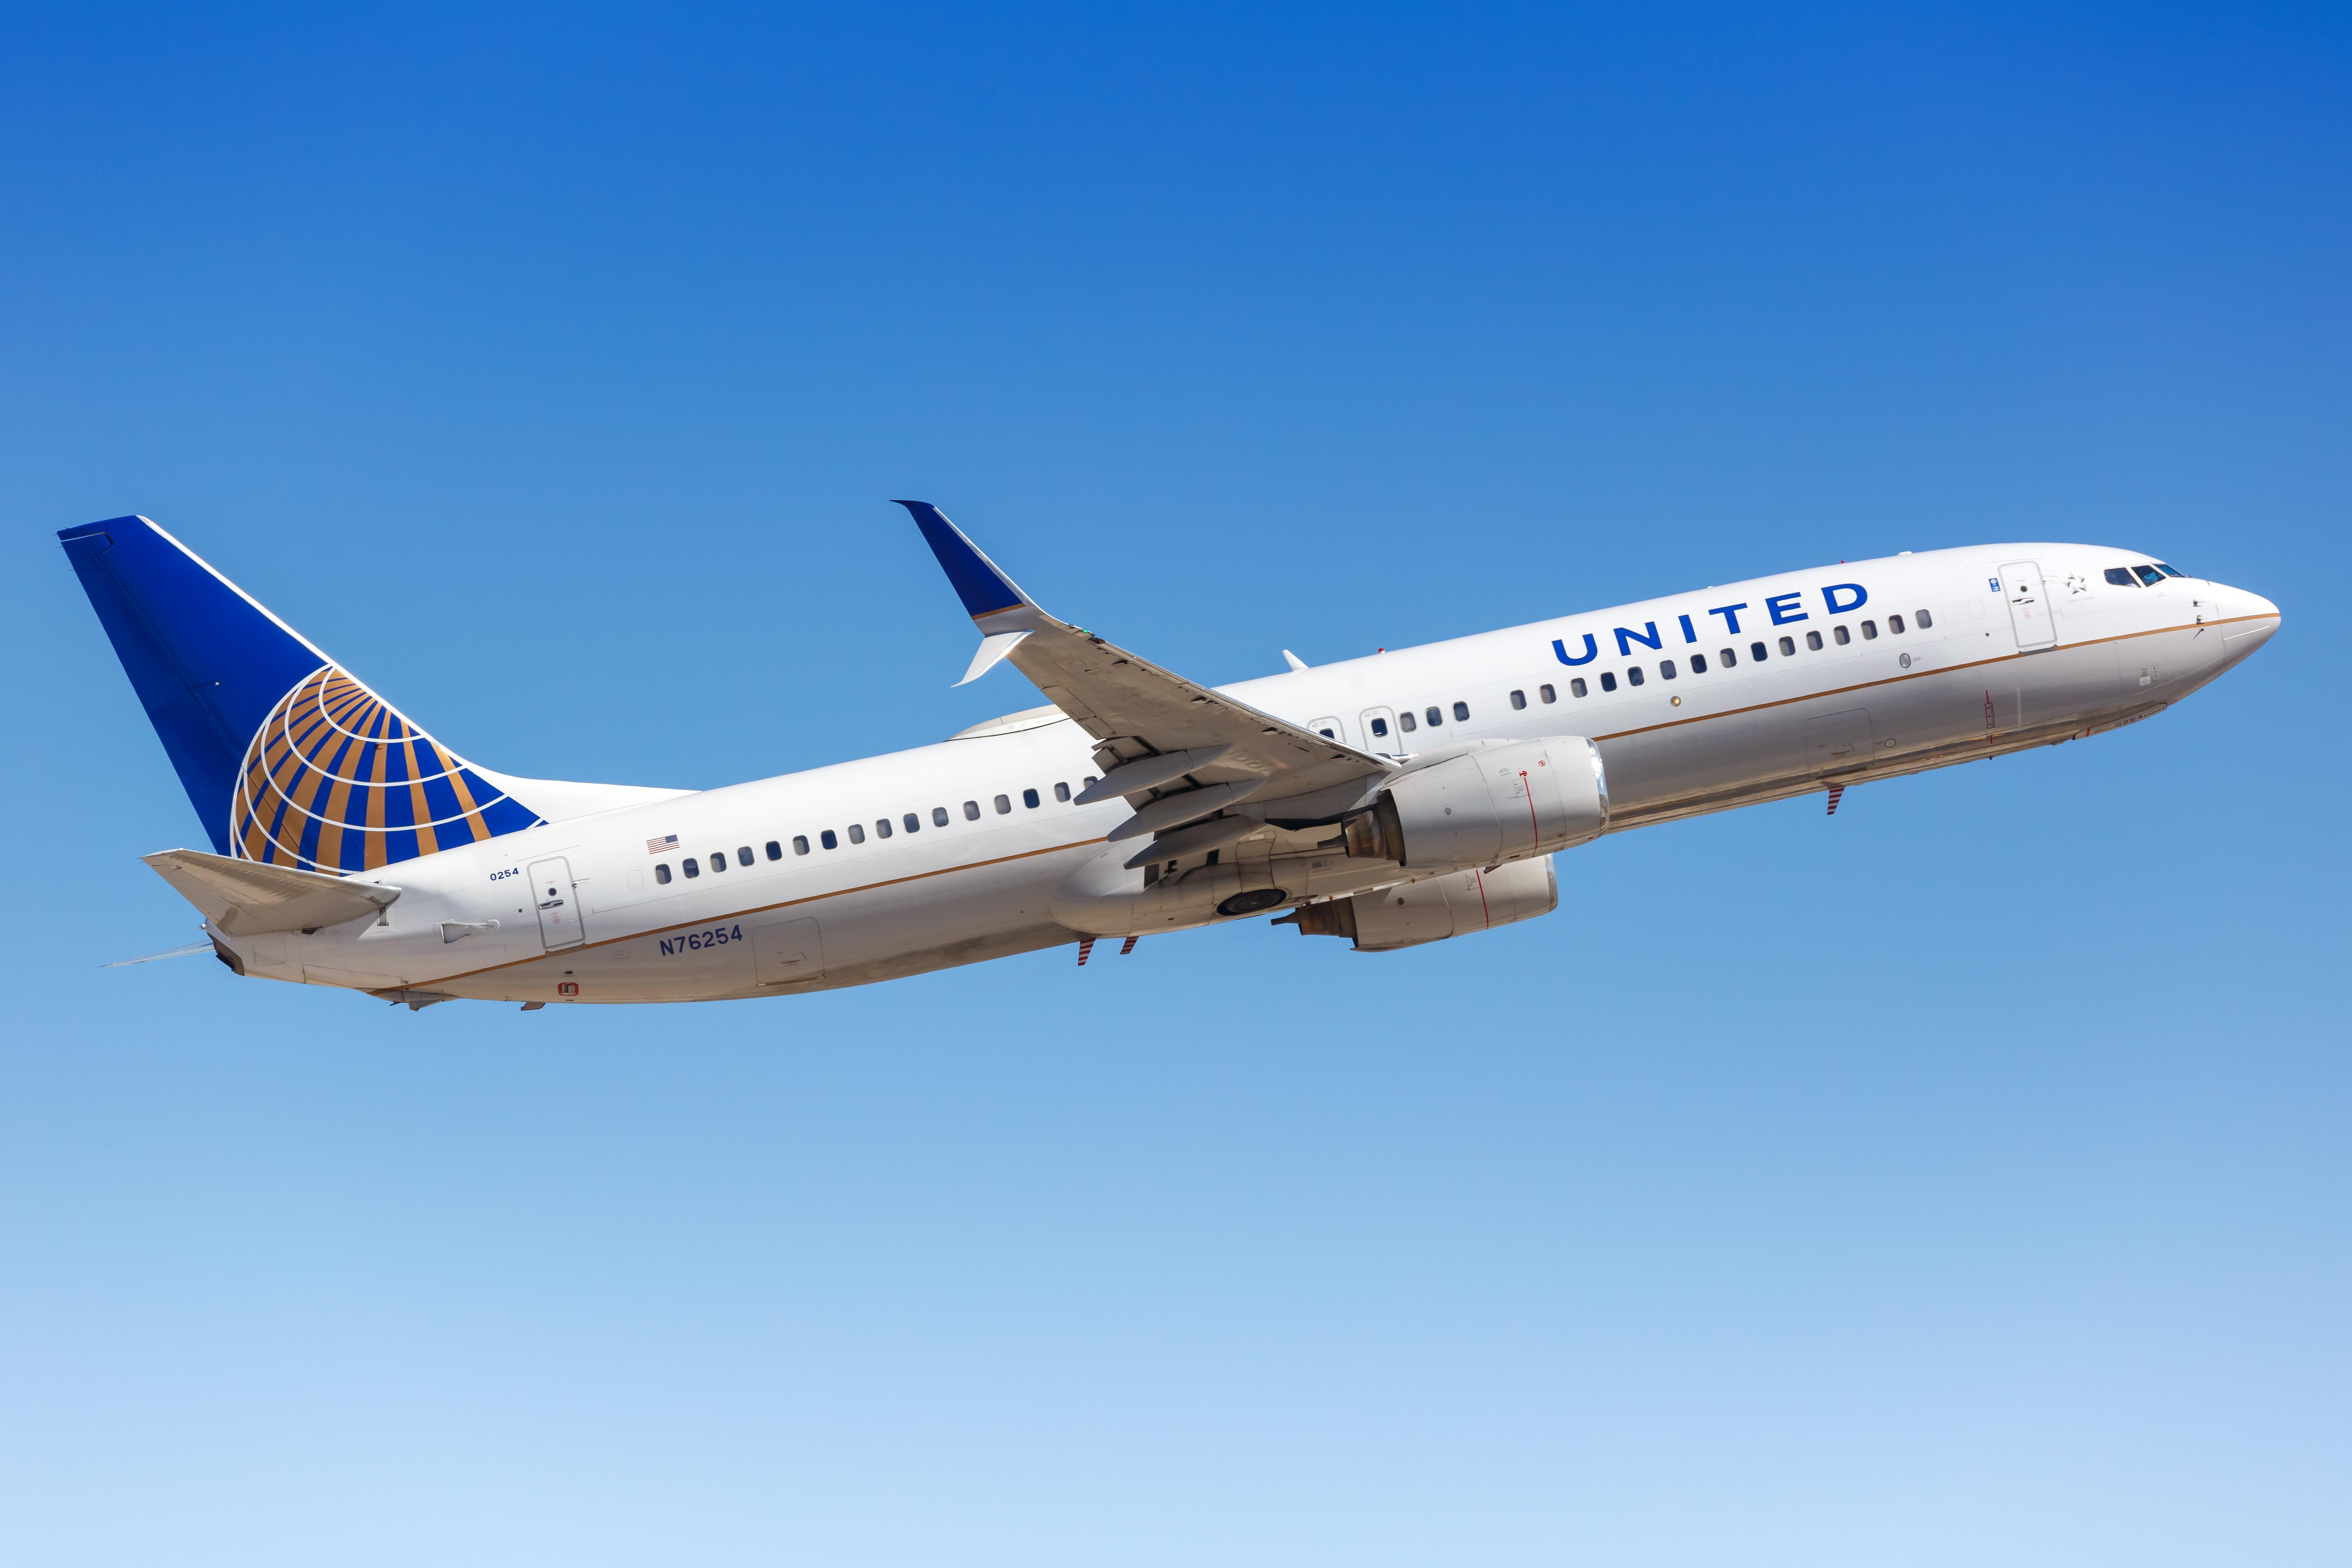 A white United Airlines Boeing 737-800 airplane on the ground at Phoenix Sky Harbor airport in Arizona, United States.